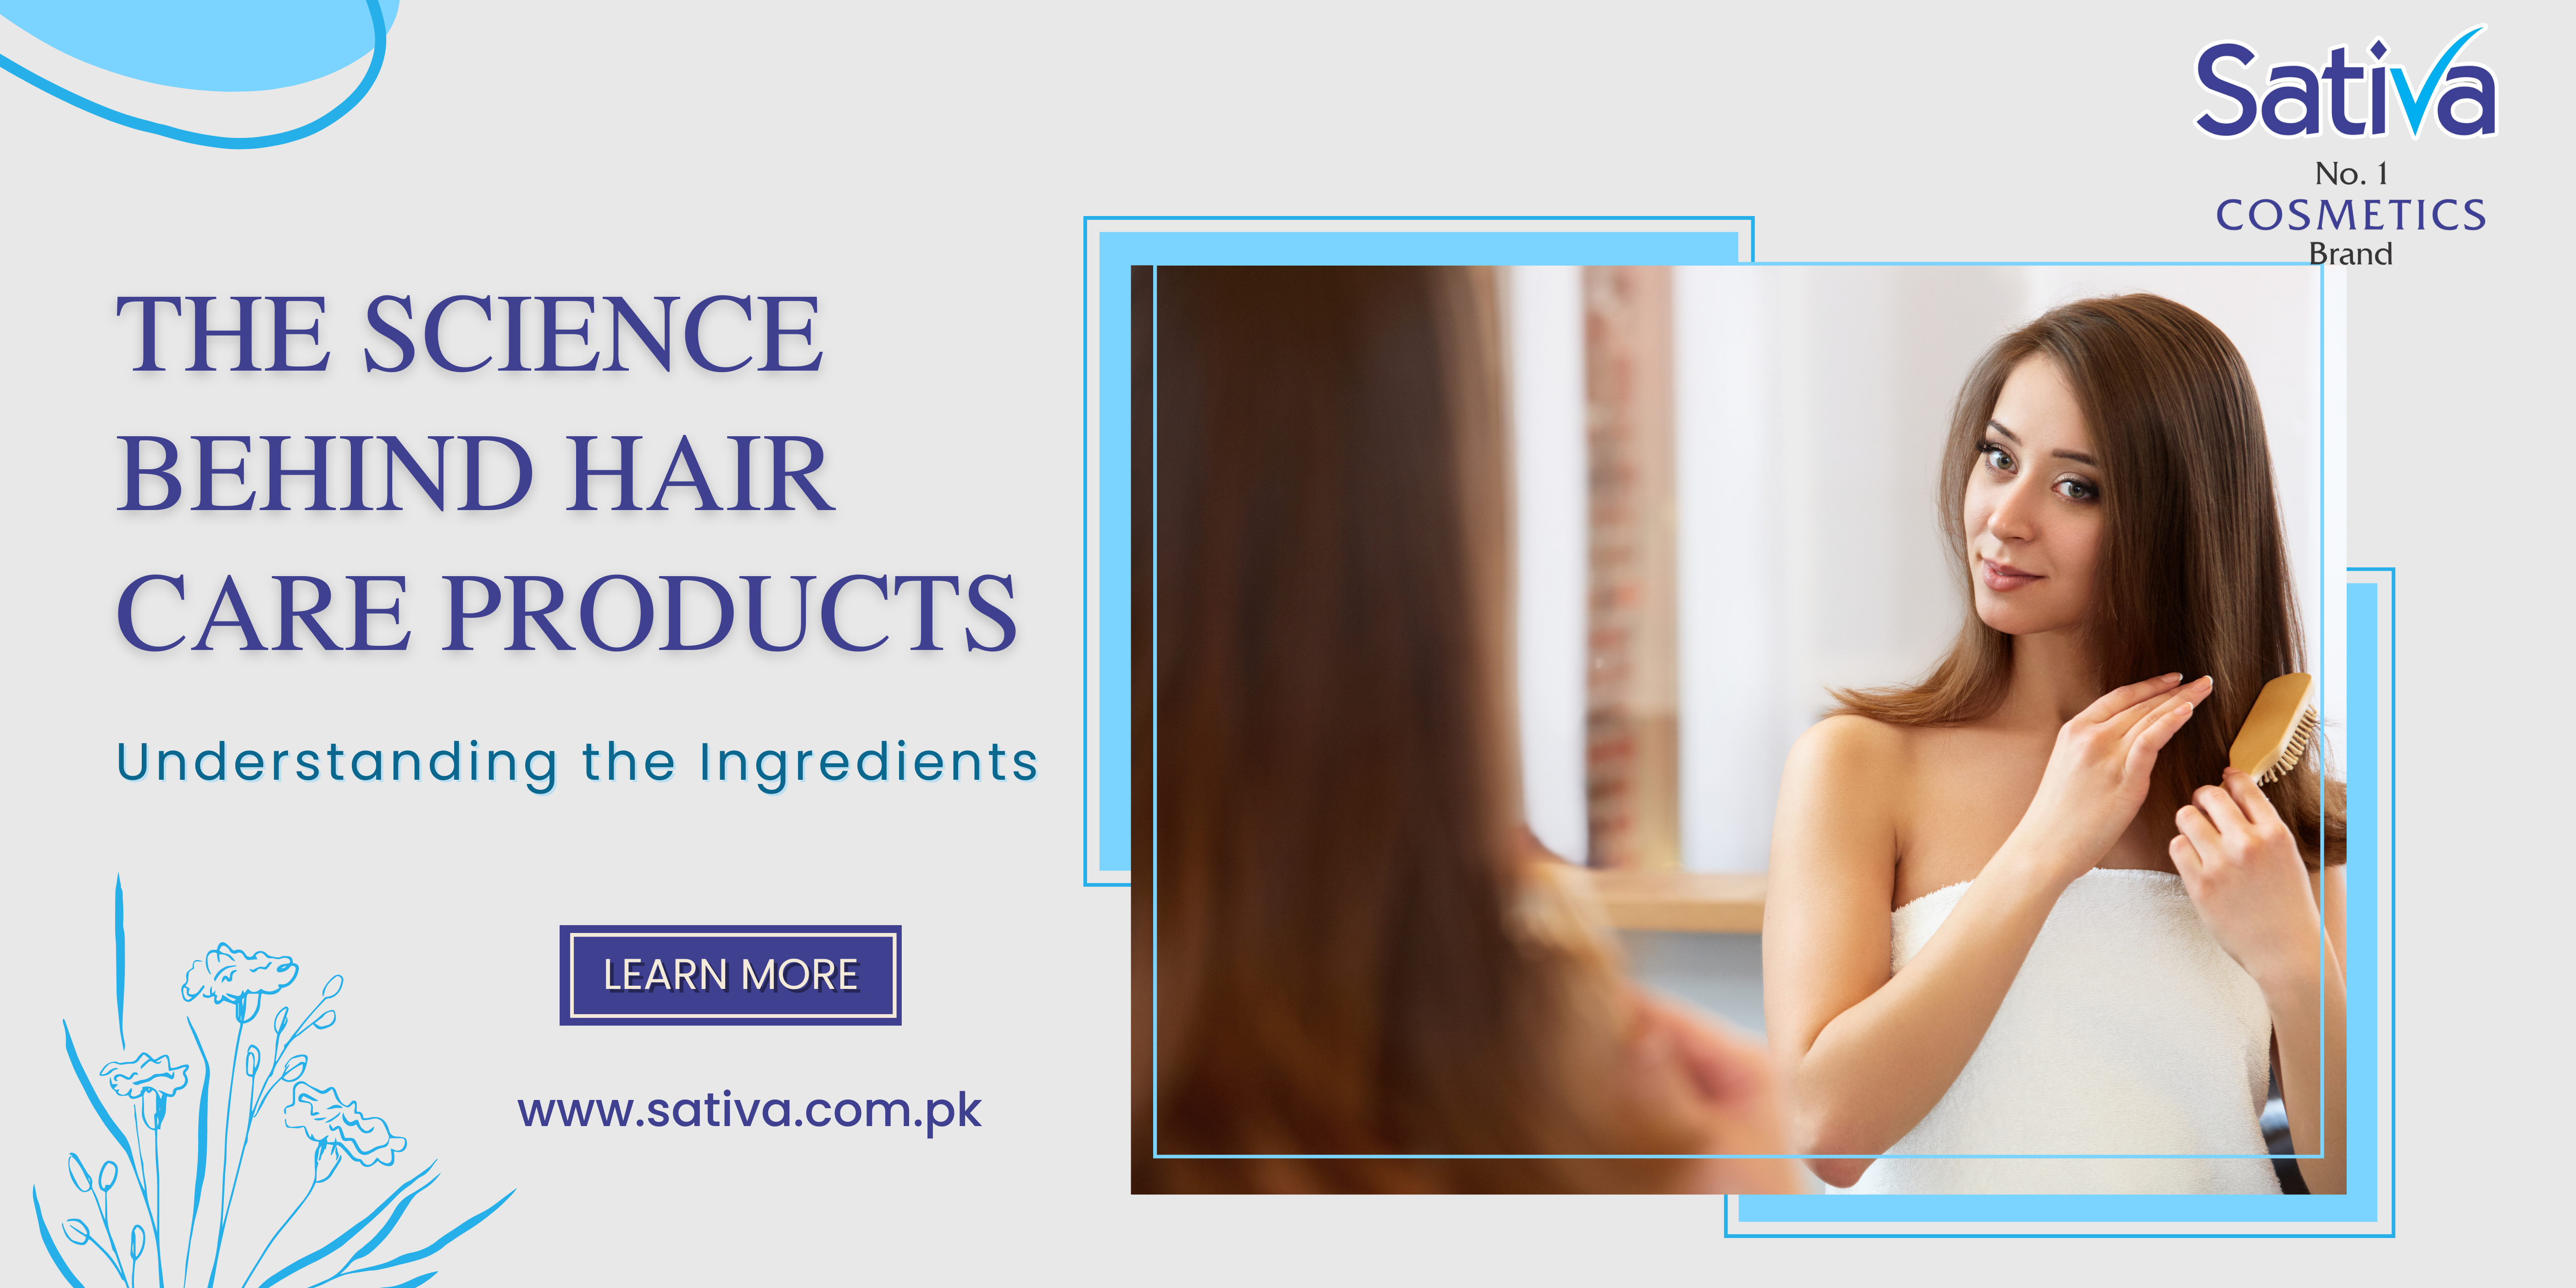 The Science Behind Hair Care Products: Understanding the Ingredients